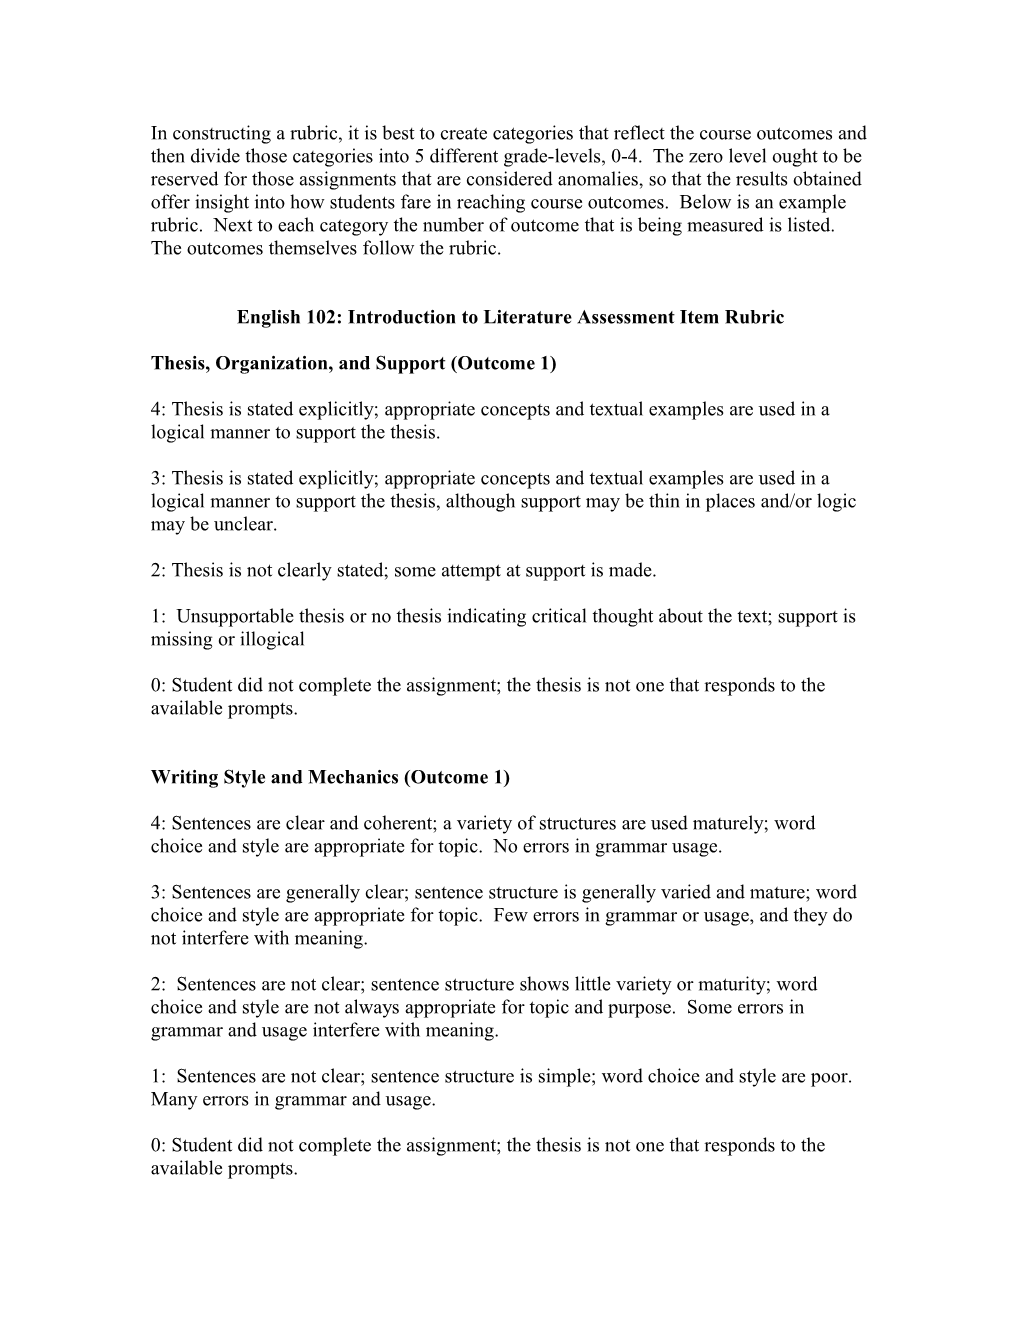 English 102: Introduction To Literature Assessment Item Rubric